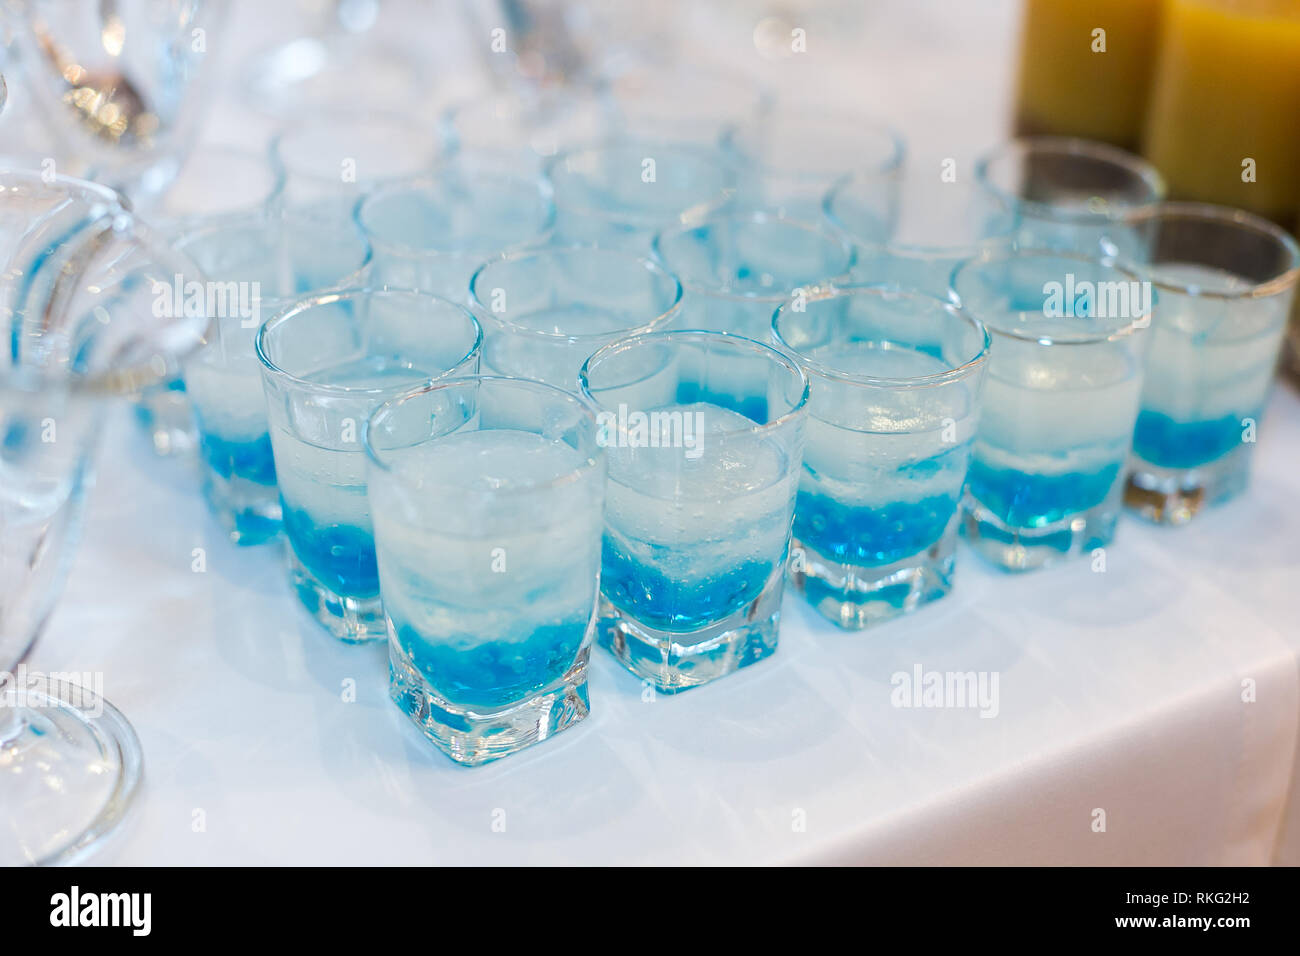 glowing drinks of the fluorescent bar, colorful cocktails with molecular caviar from blue syrups, delicate emulsions and gels of strong men's drinks. Stock Photo